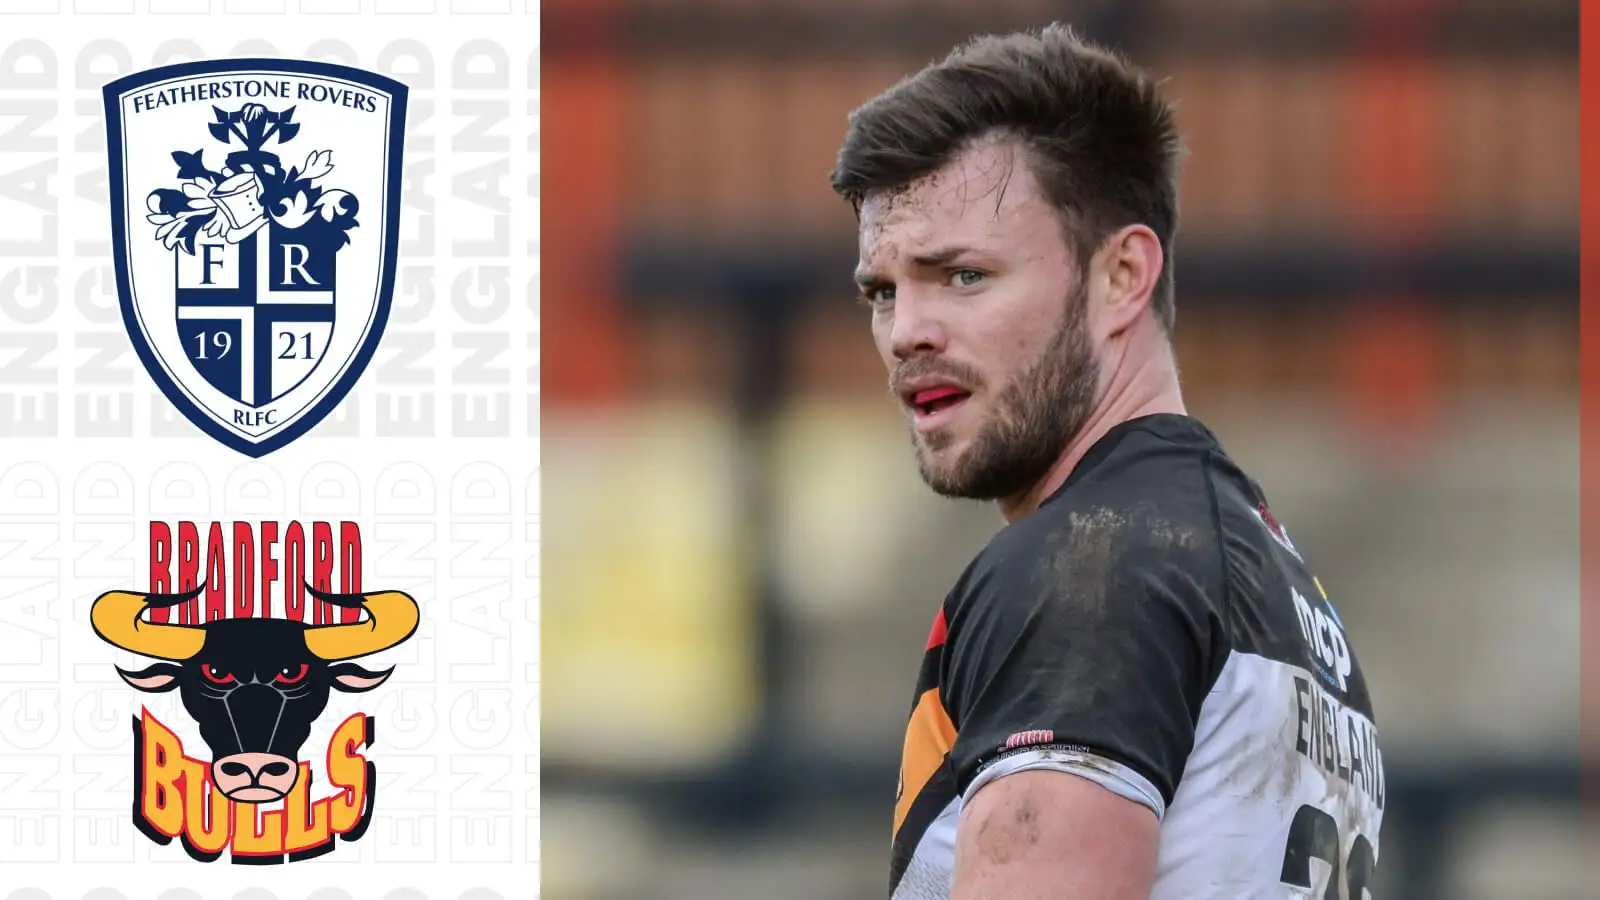 Featherstone Rovers swoop for Bradford Bulls ace as ‘uncompromising’ forward returns to Post Office Road